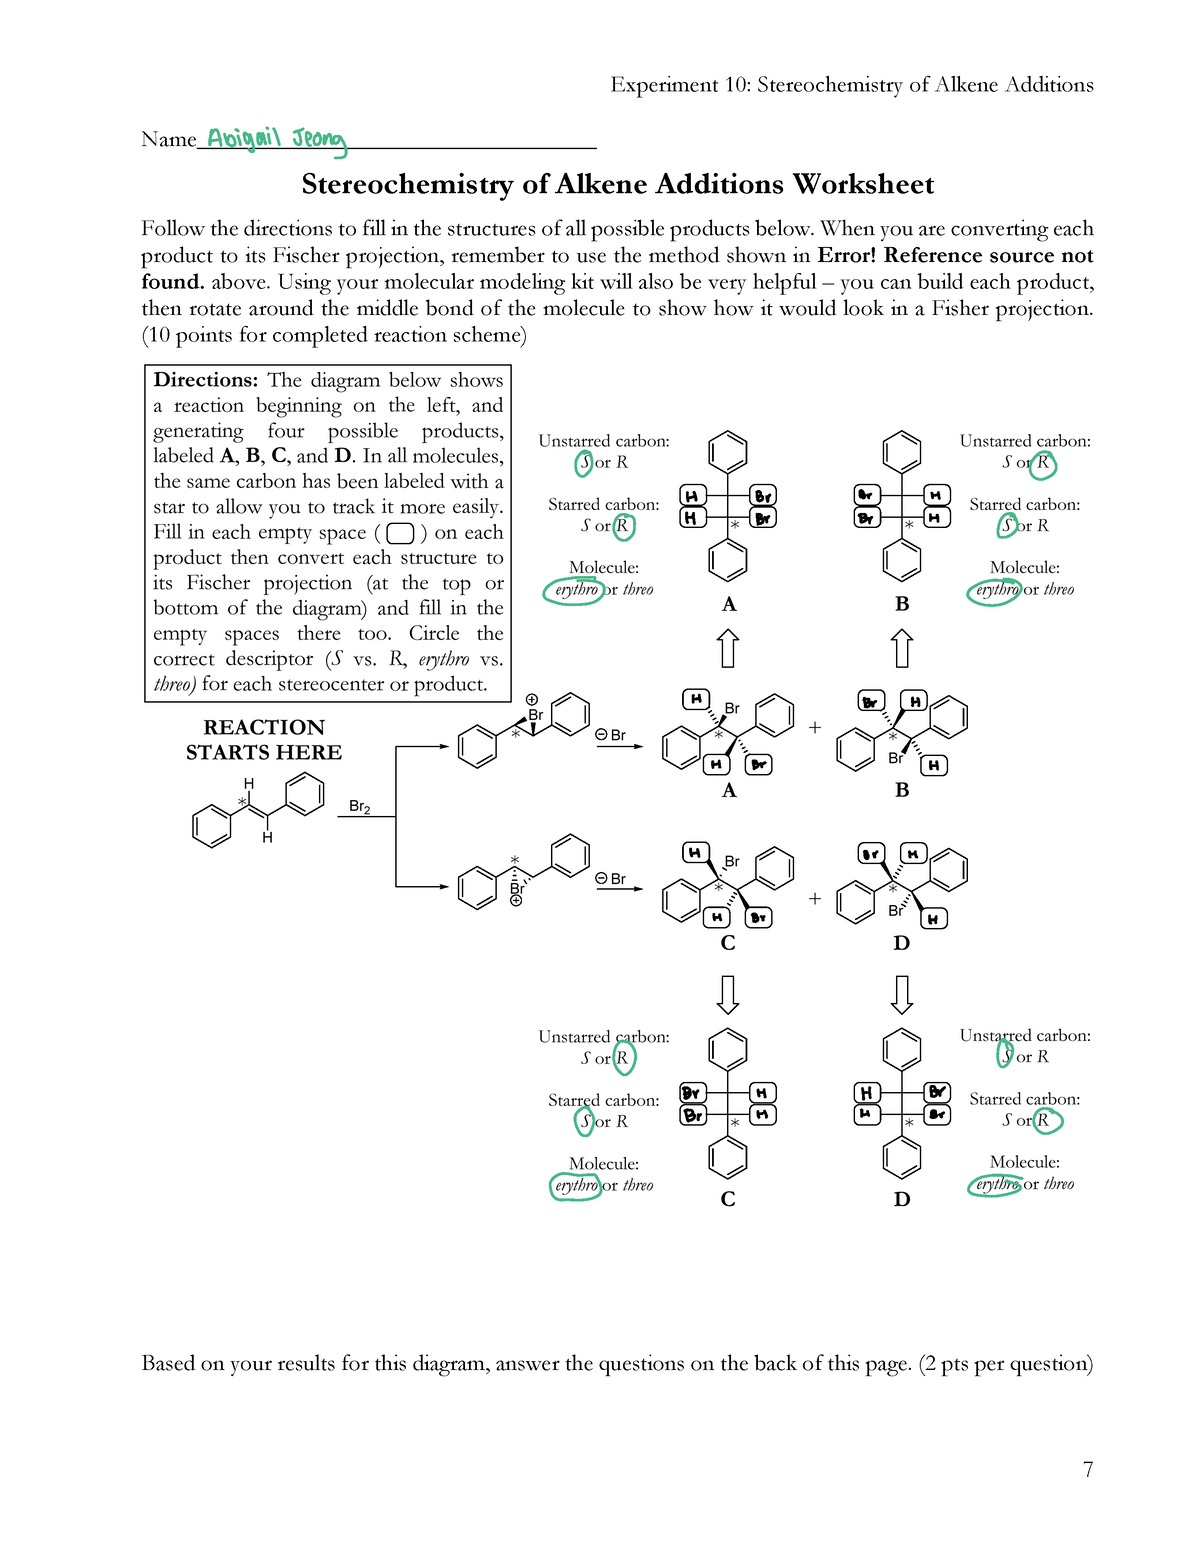 10-stereochemistry-of-alkene-additions-1-experiment-10-stereochemistry-of-alkene-additions